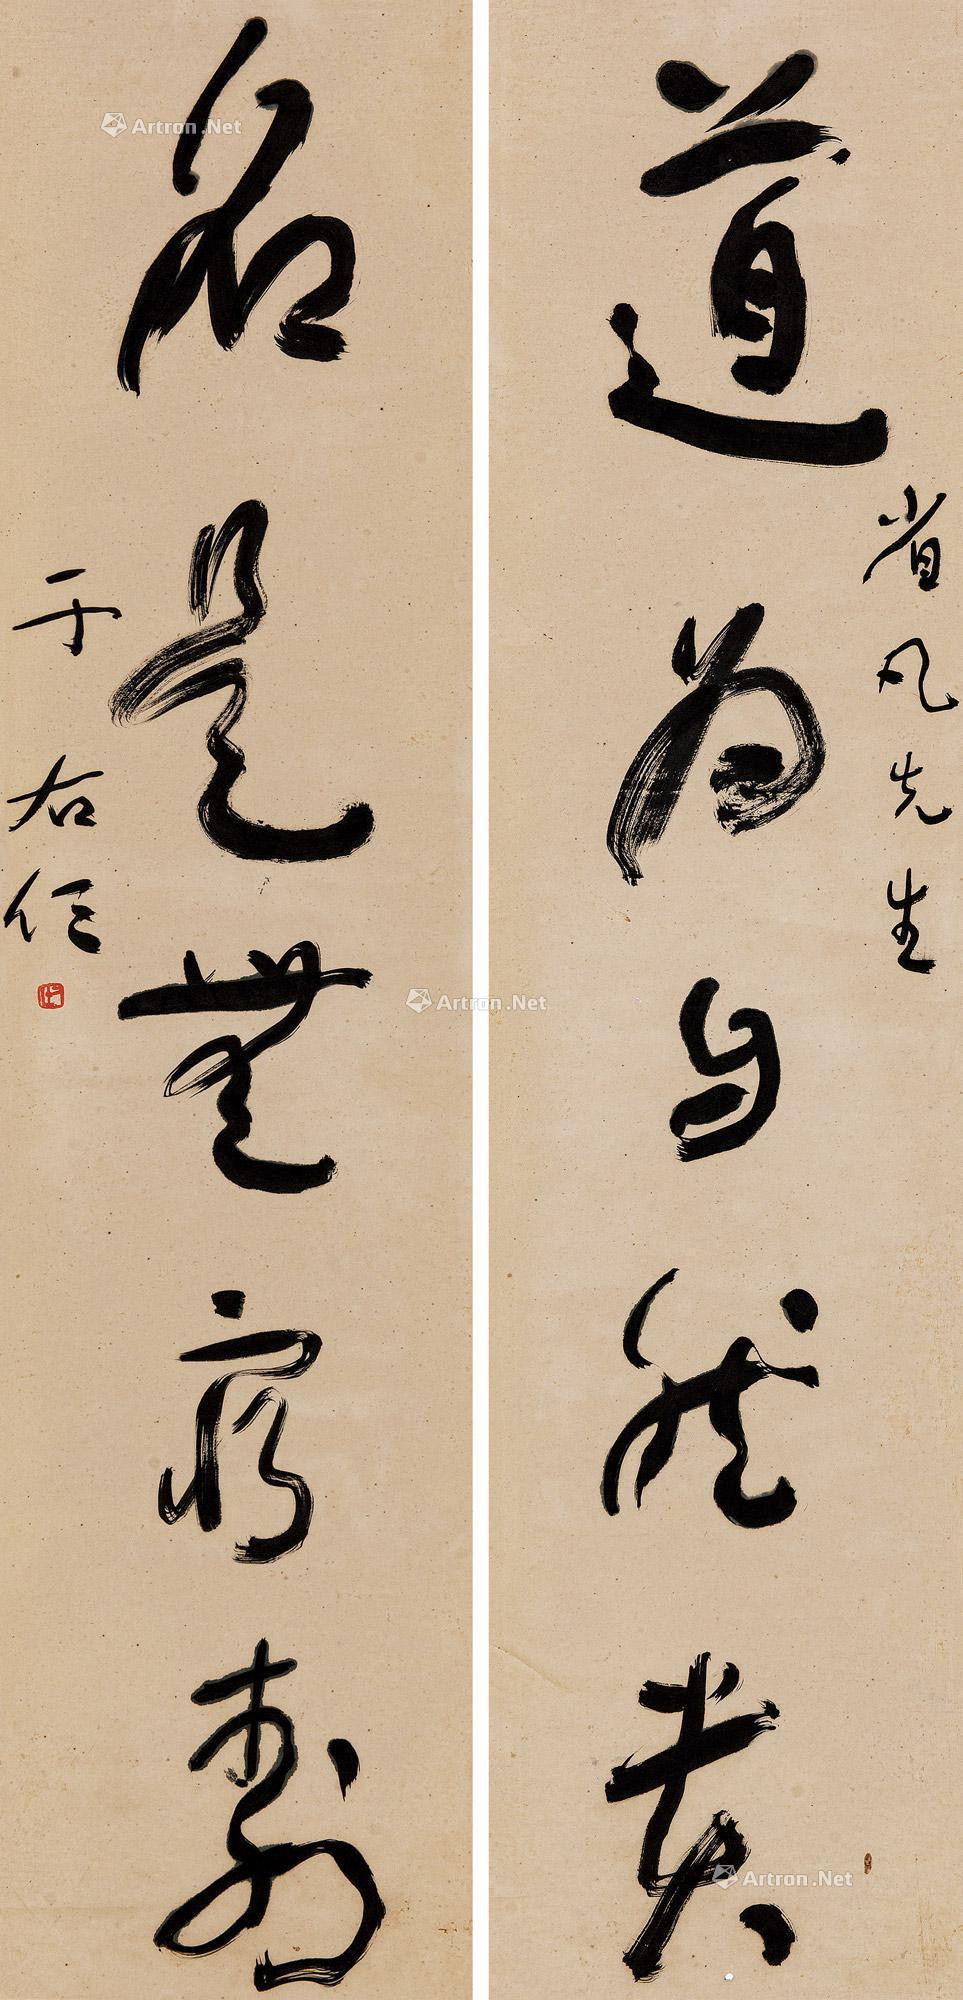 Five- Character Calligraphy  Couplet in Cursive  Script